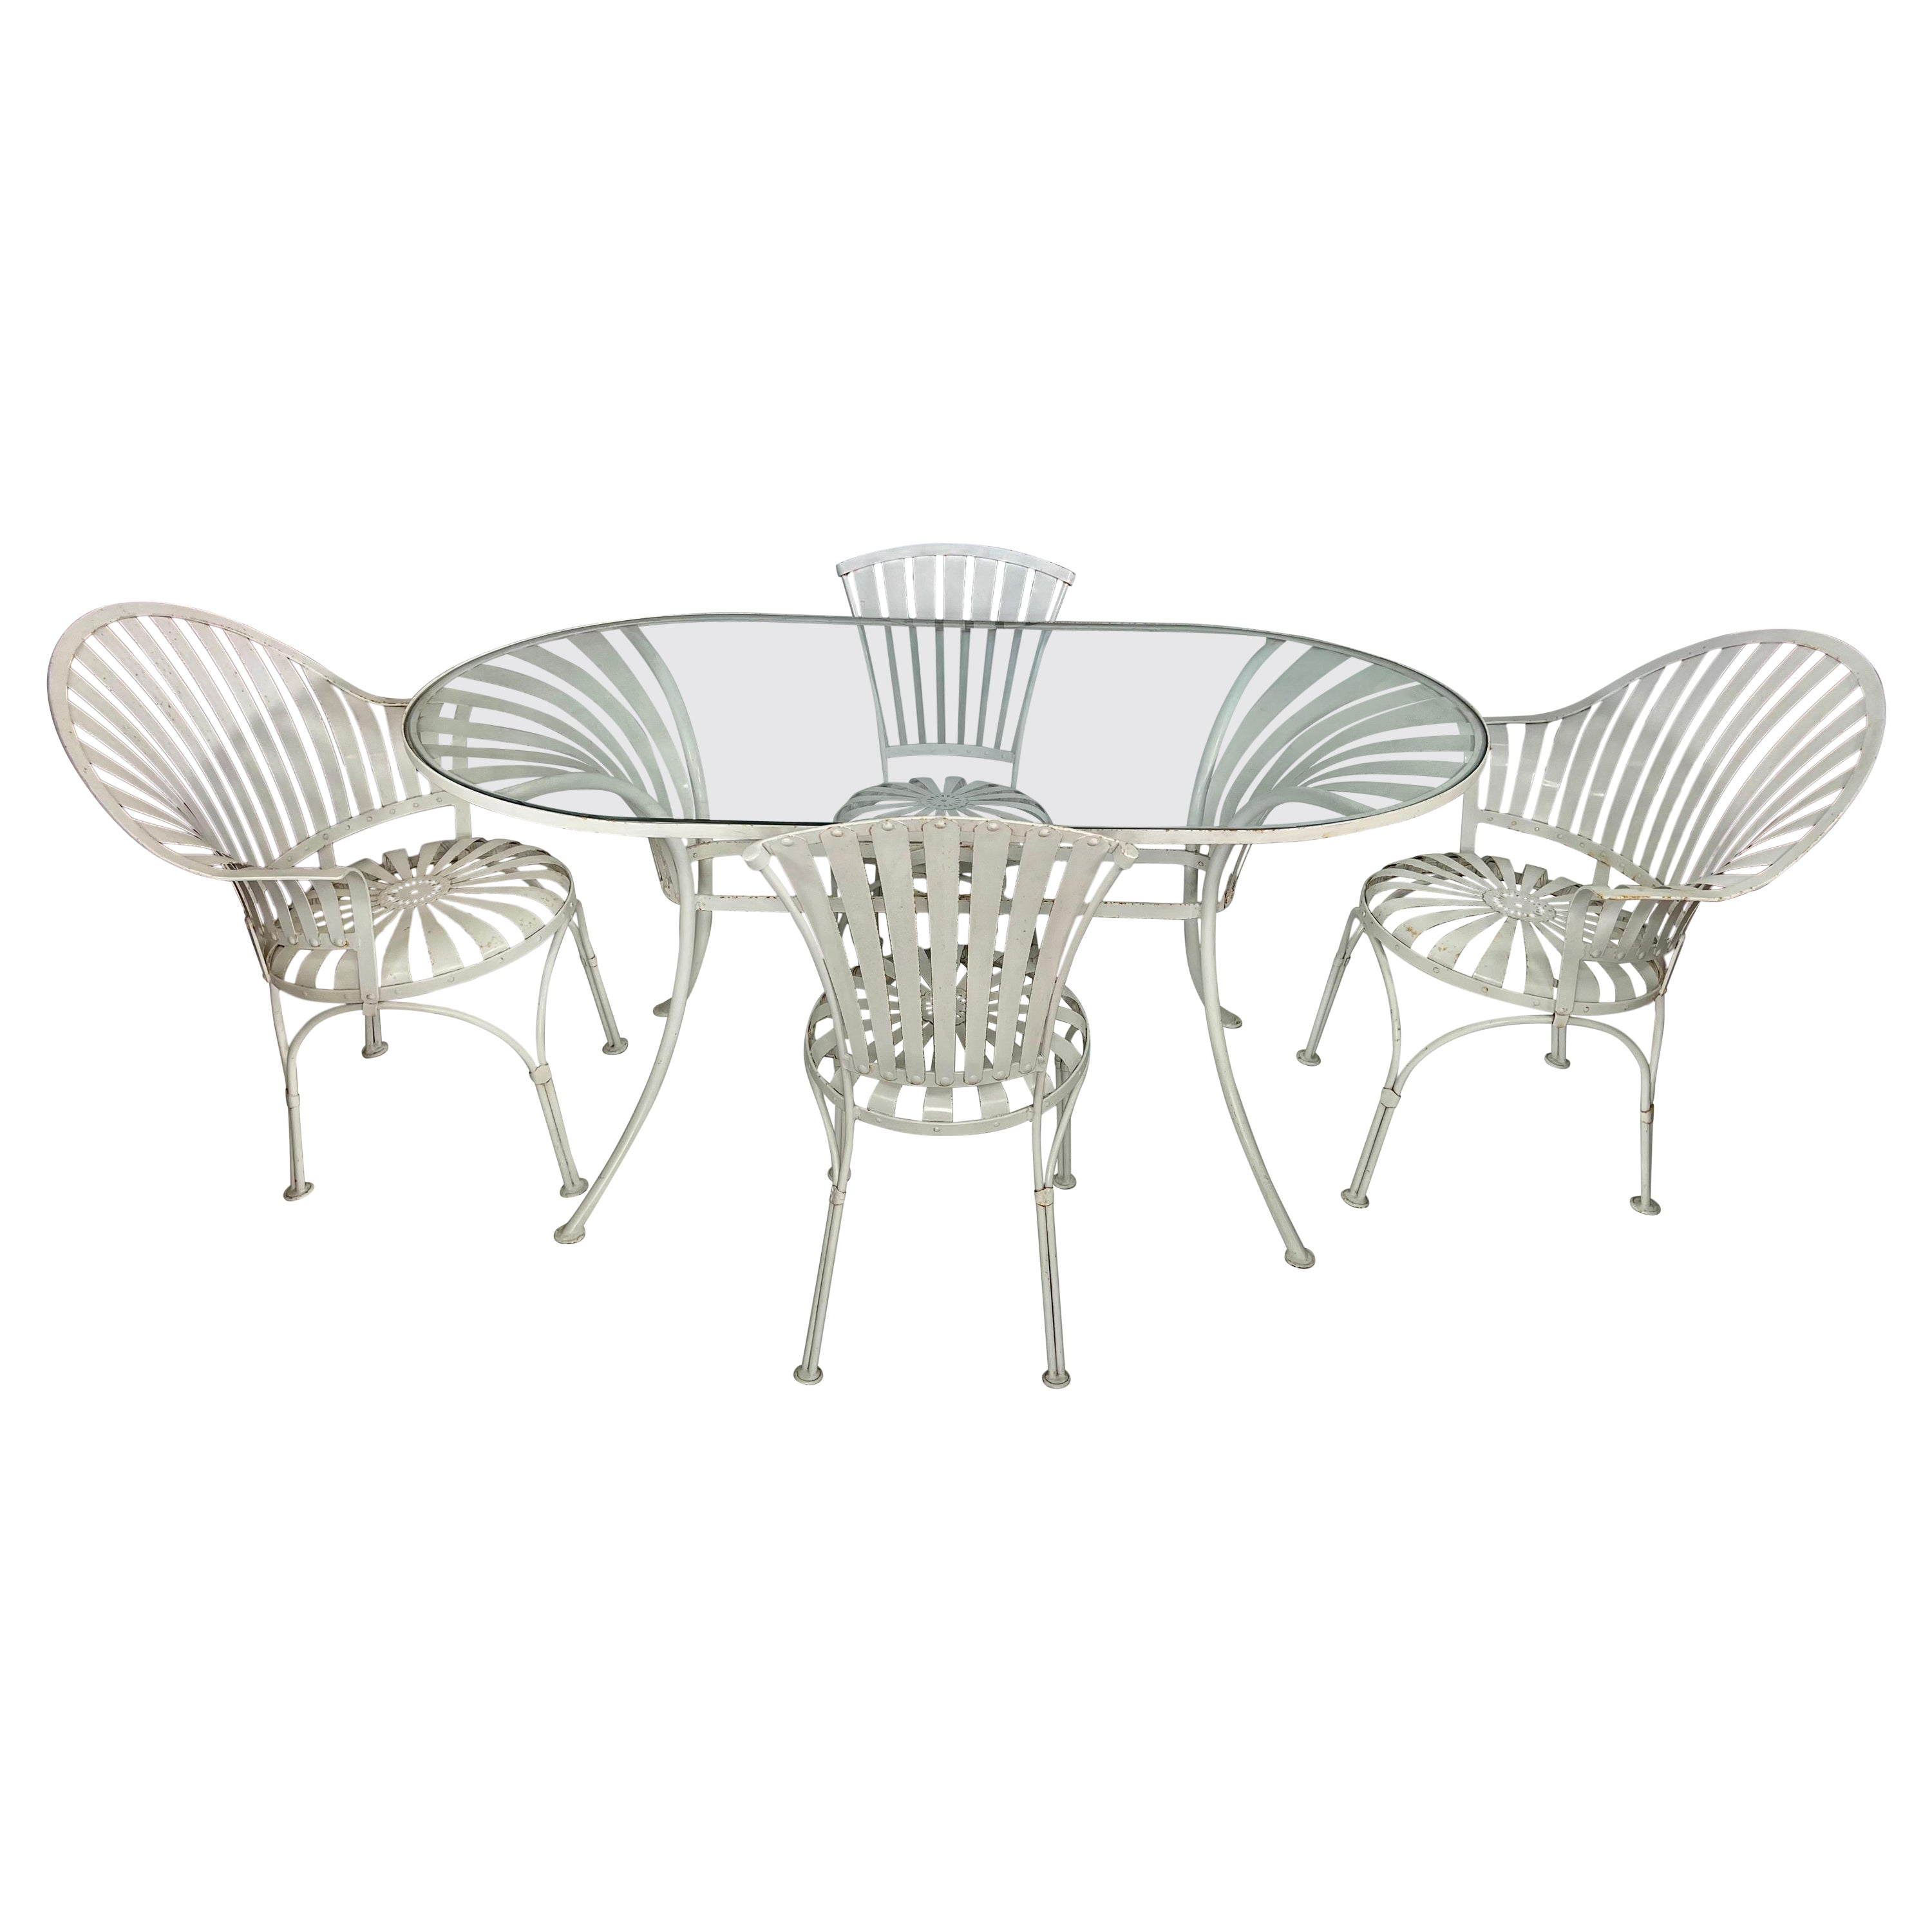 Francois Carre Art Deco Patio Table and Chairs - 5 Piece Set For Sale